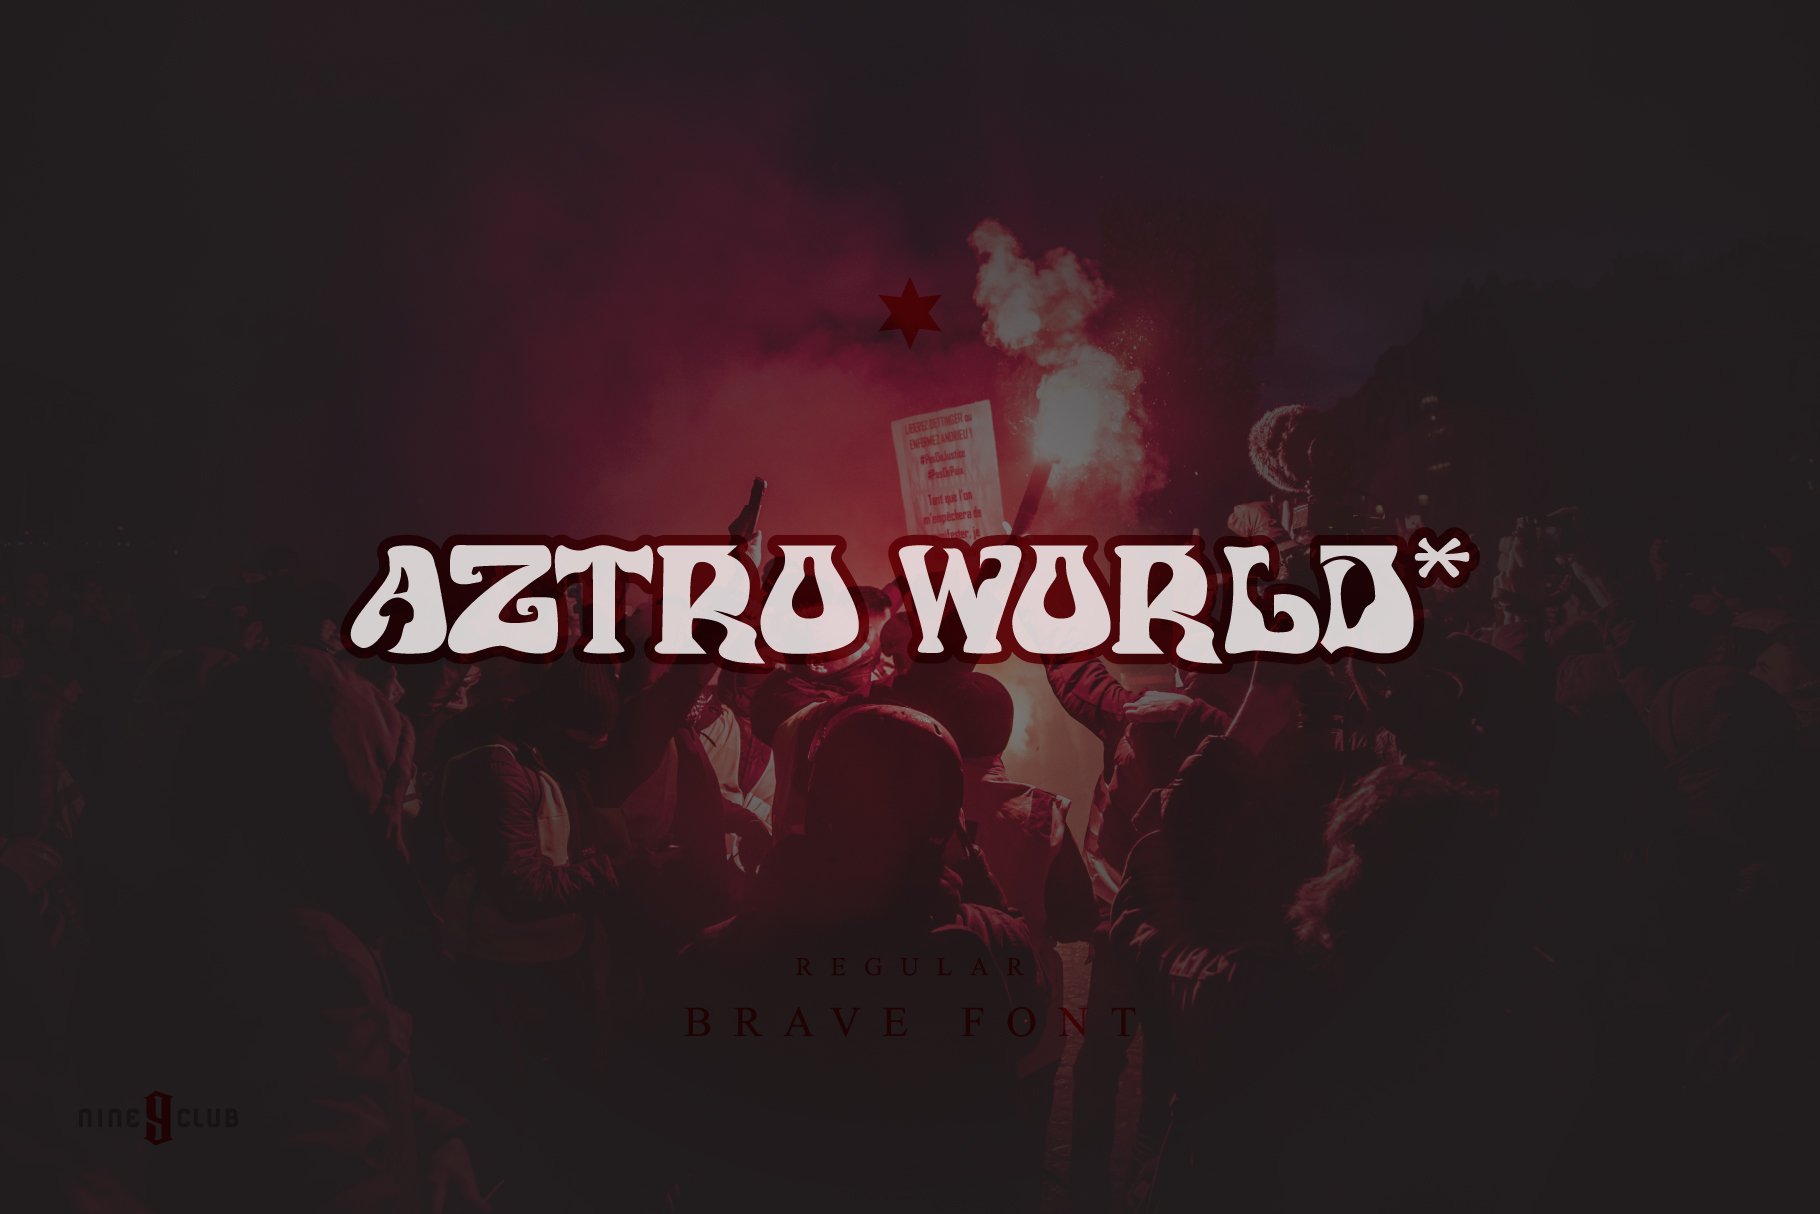 Aztro World | Fancy Font cover image.